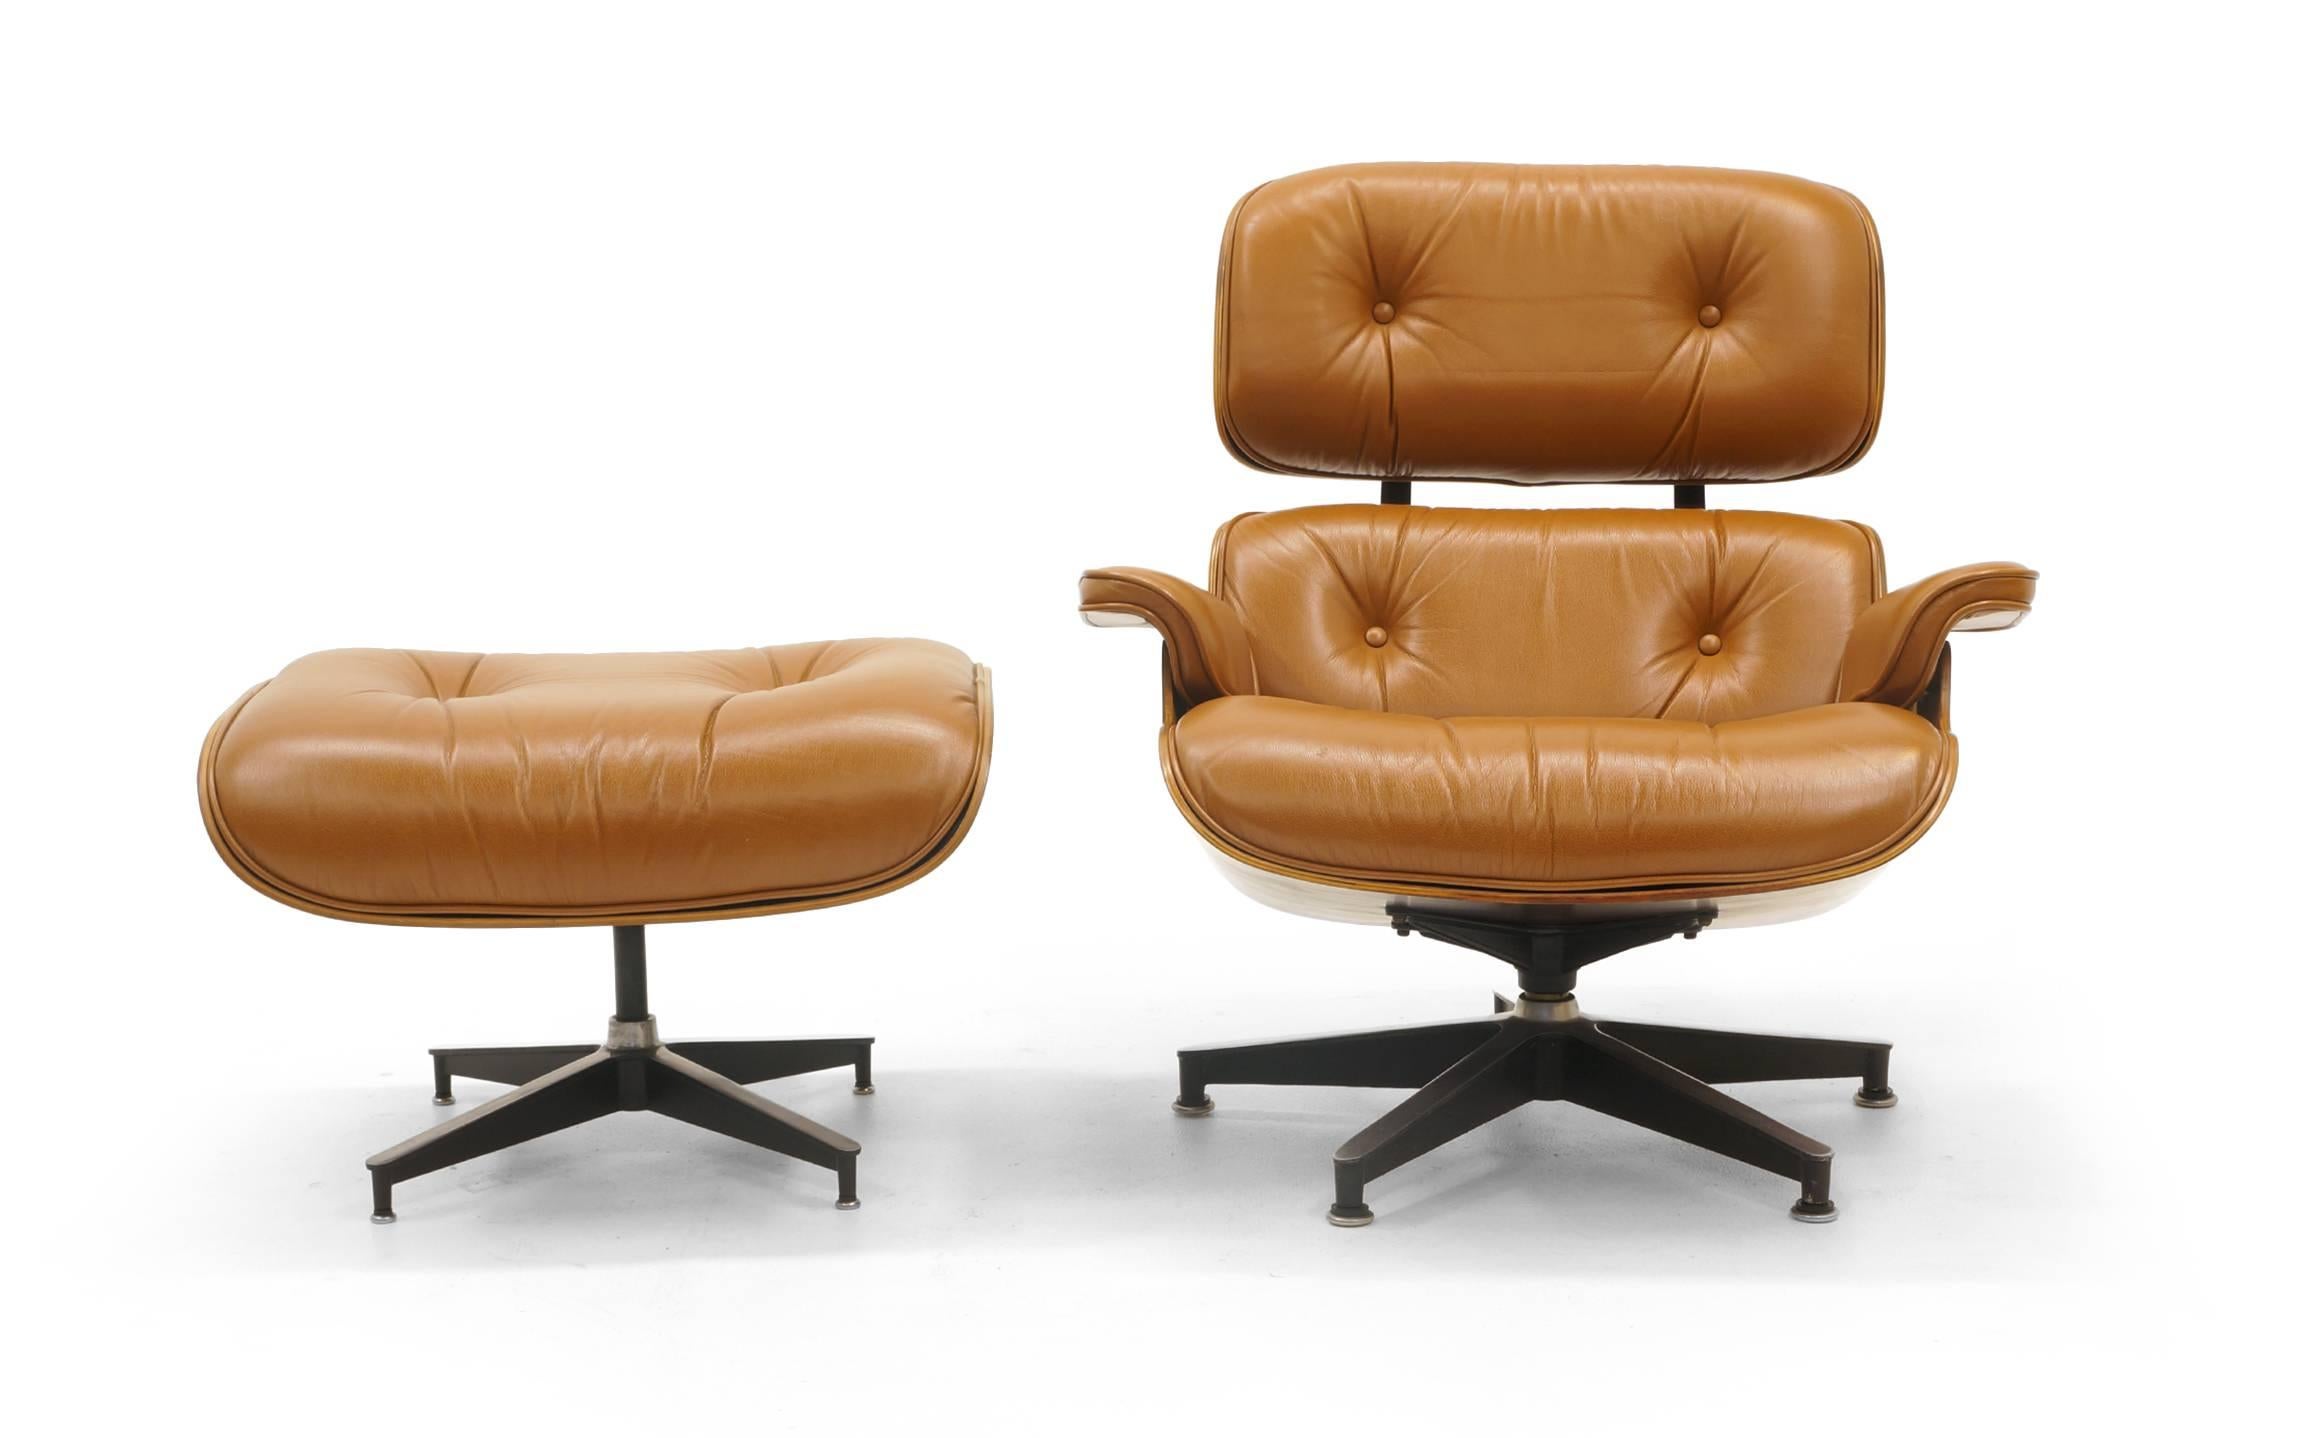 Charles and Ray Eames lounge chair and ottoman in Brazilian rosewood and cognac/ camel color/tan leather in very good to excellent condition. One previous owner and we have the original receipts and leather samples. The leather on this chair is in